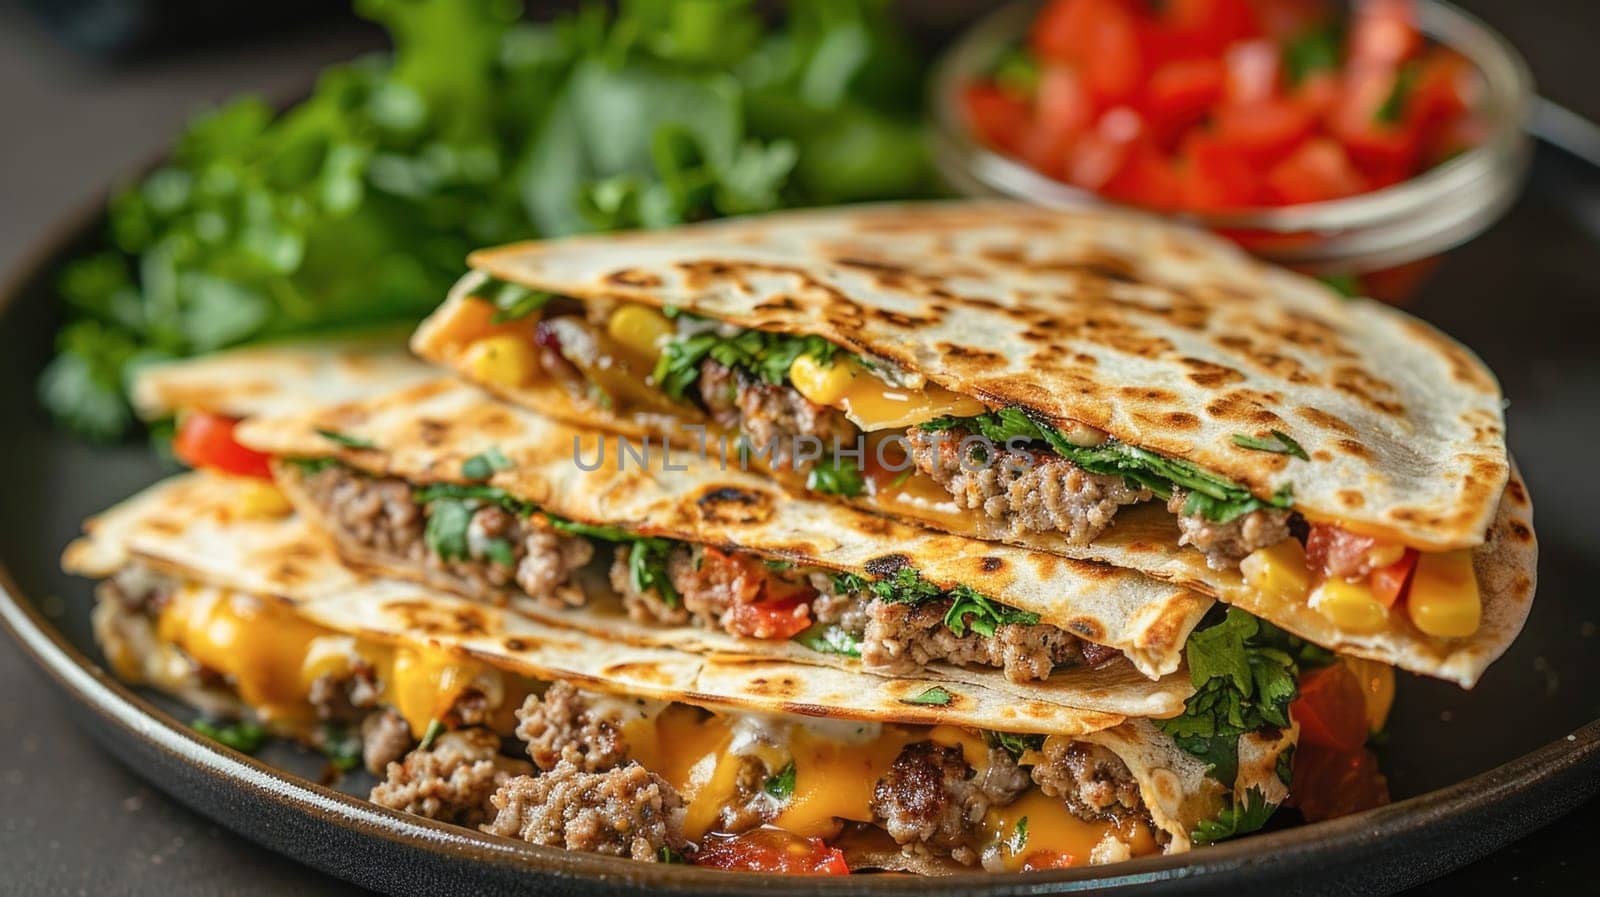 A plate displays neatly arranged stacked quesadillas, showcasing a delicious combination of ingredients and flavors